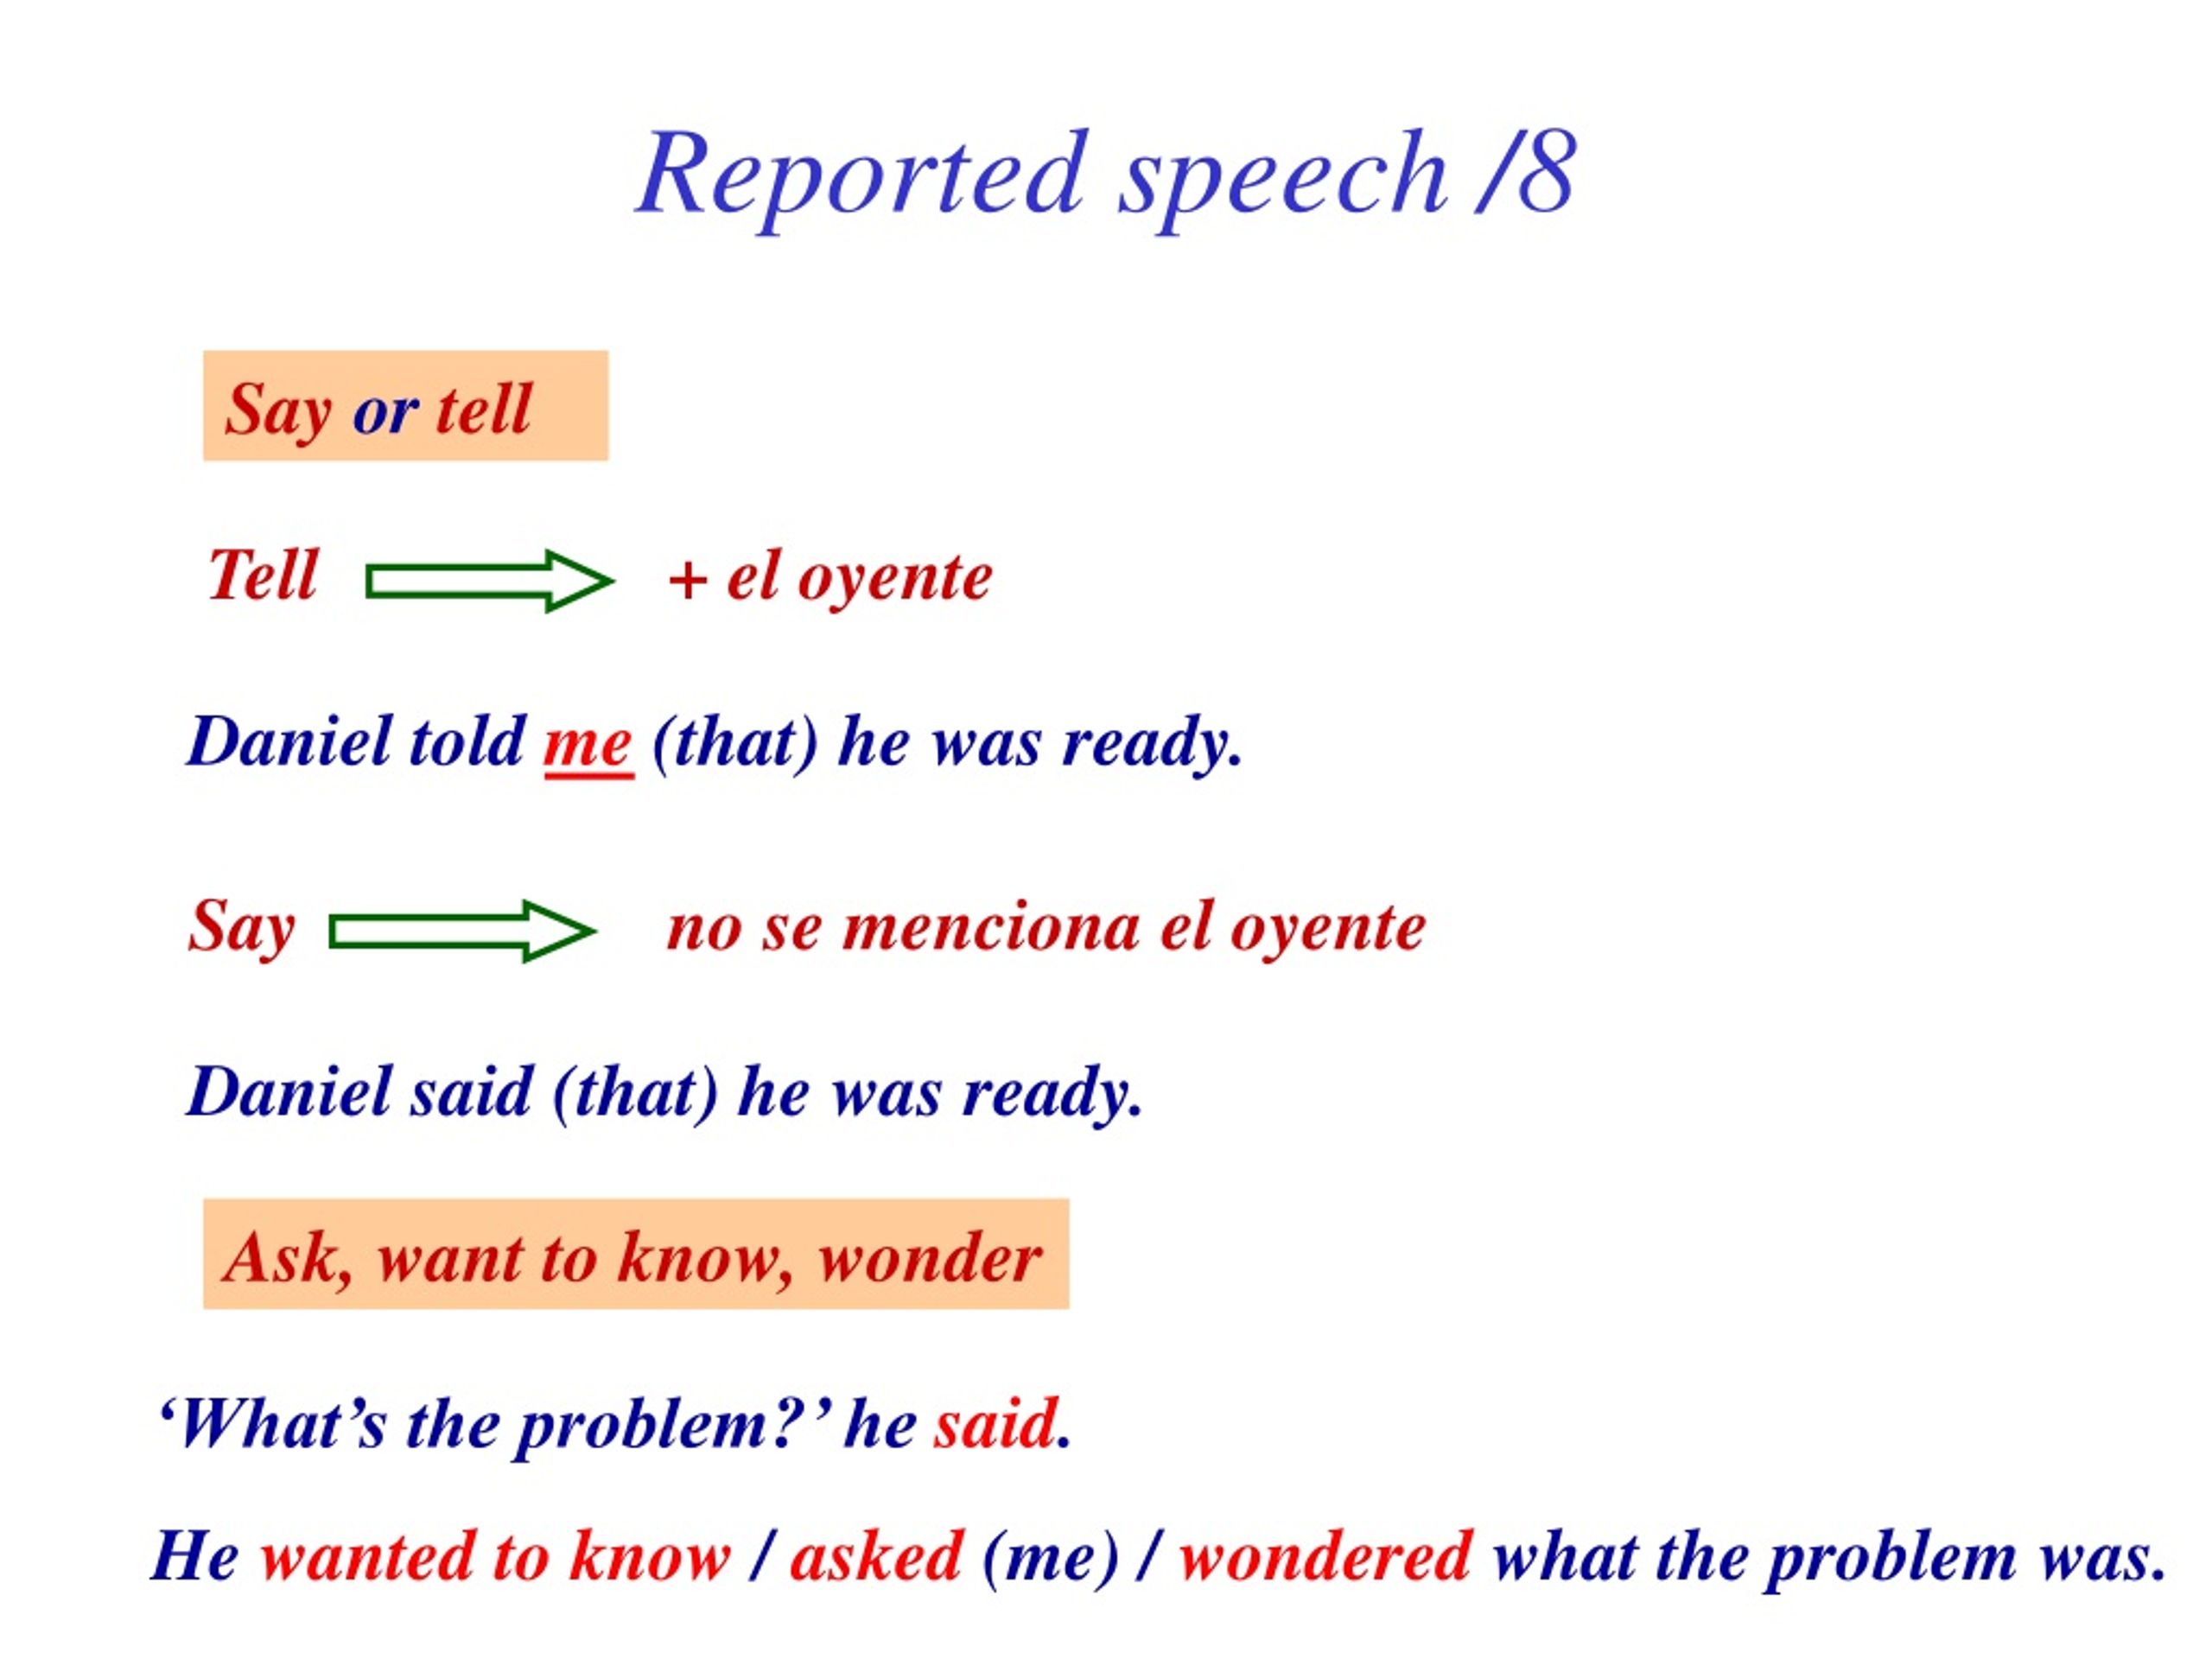 Say tell ask reported speech. Reported Speech tell or say правило. Say tell reported Speech разница. Reported Speech say tell ask правило. Said told reported Speech.